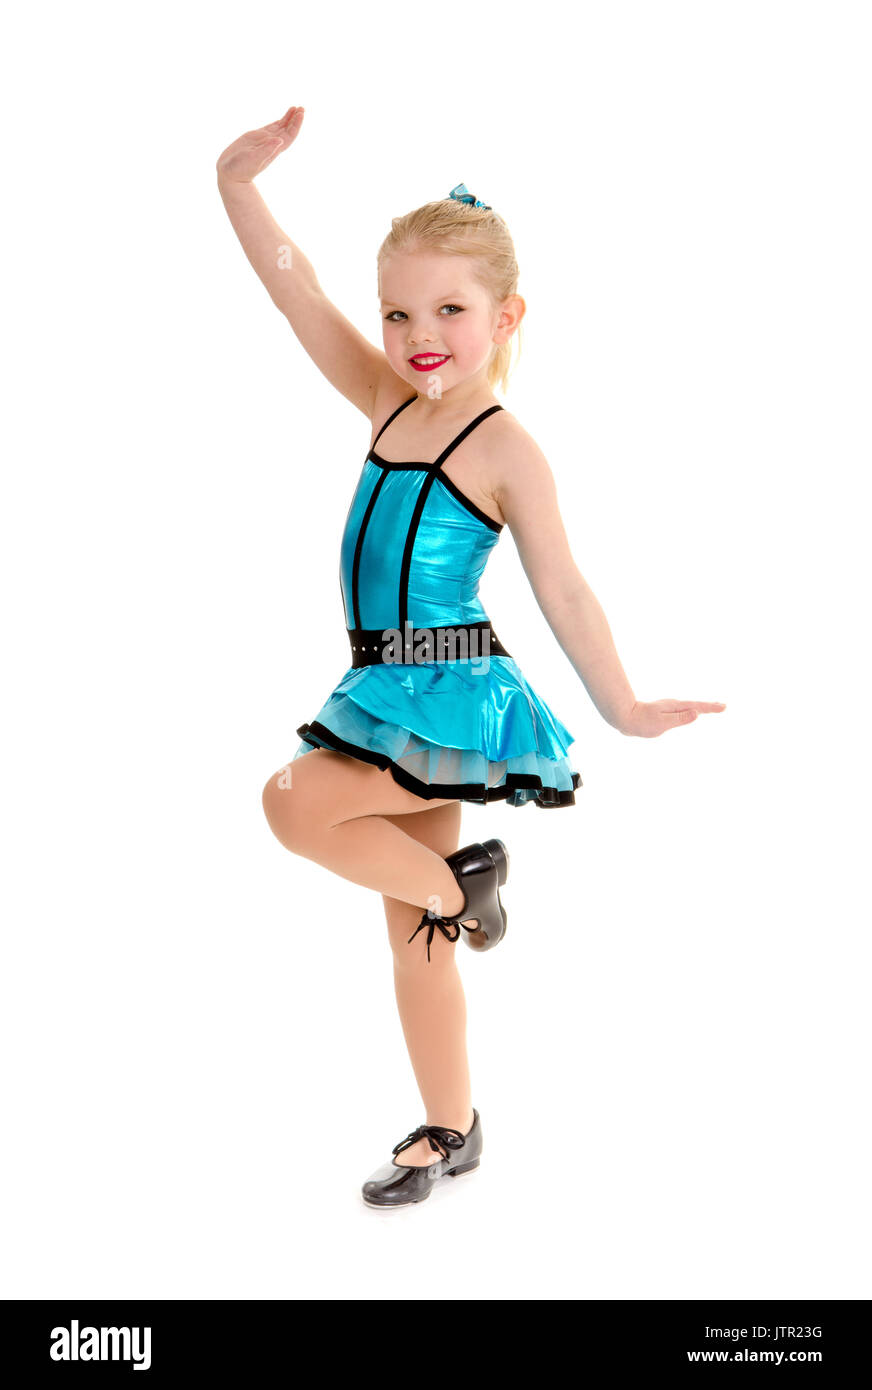 Cute Little Girl Tap Dancer Poses with Leg  Lifted in Tap Shoes and Costume Stock Photo